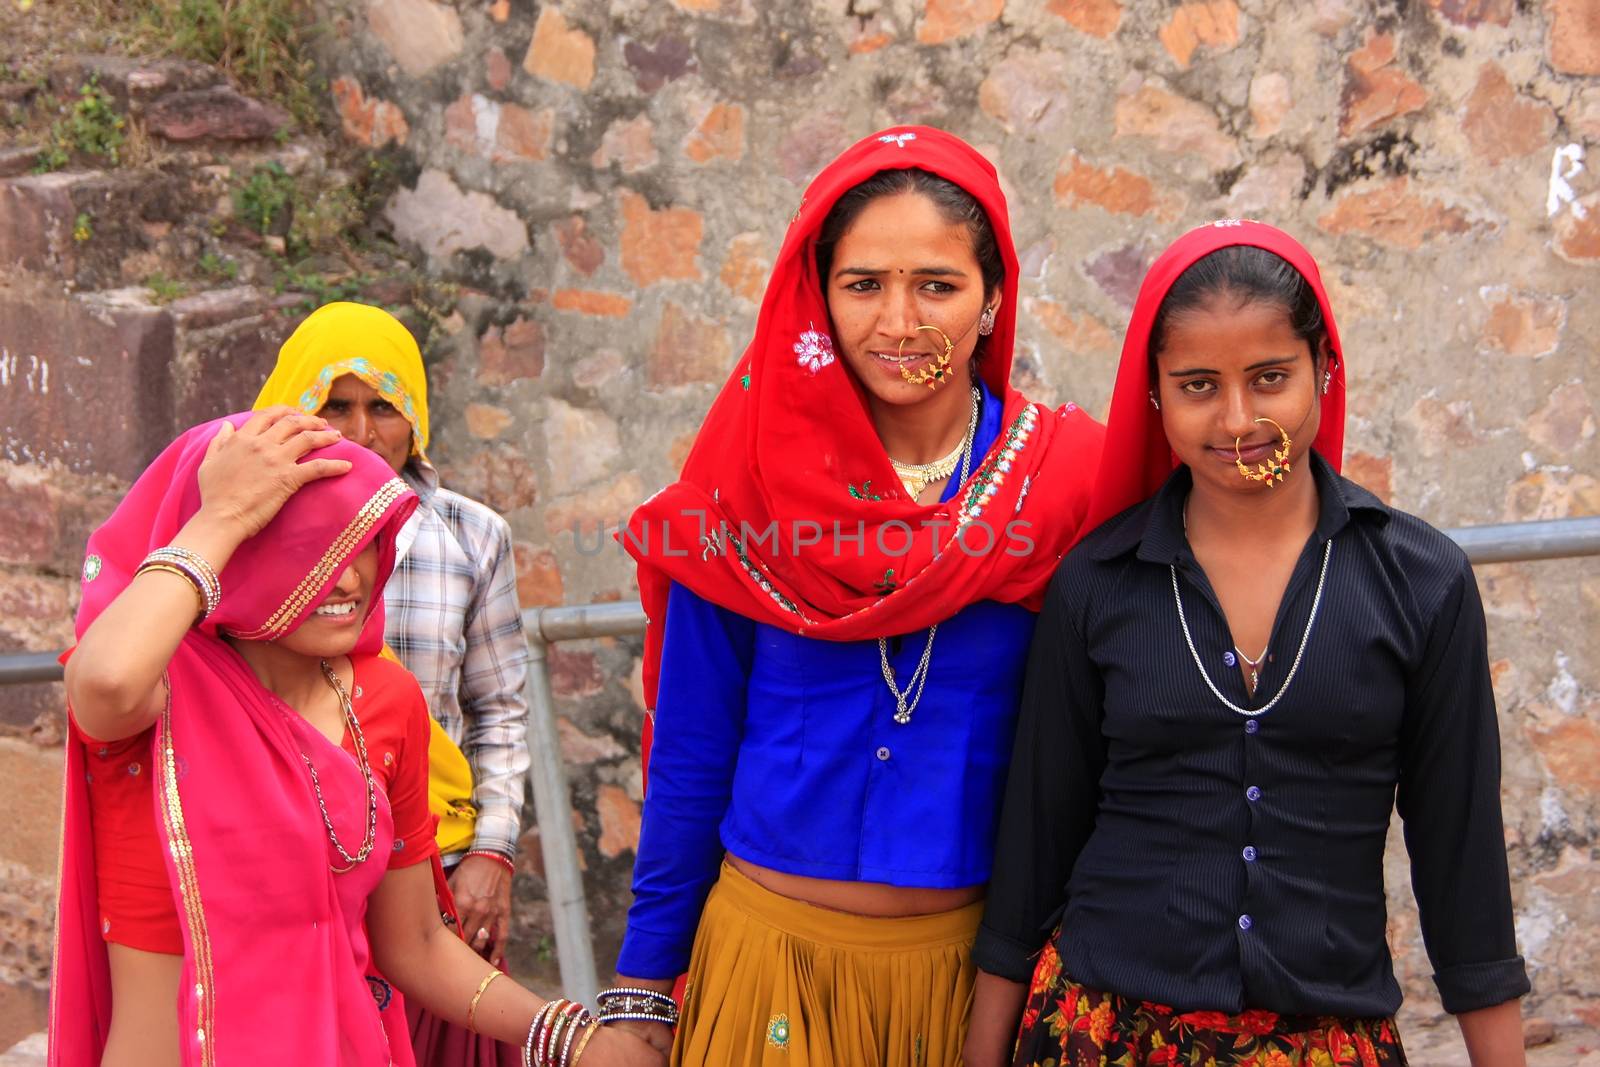 Indian women in colorful saris walking up the stairs at Ranthambore Fort, Rajasthan, India